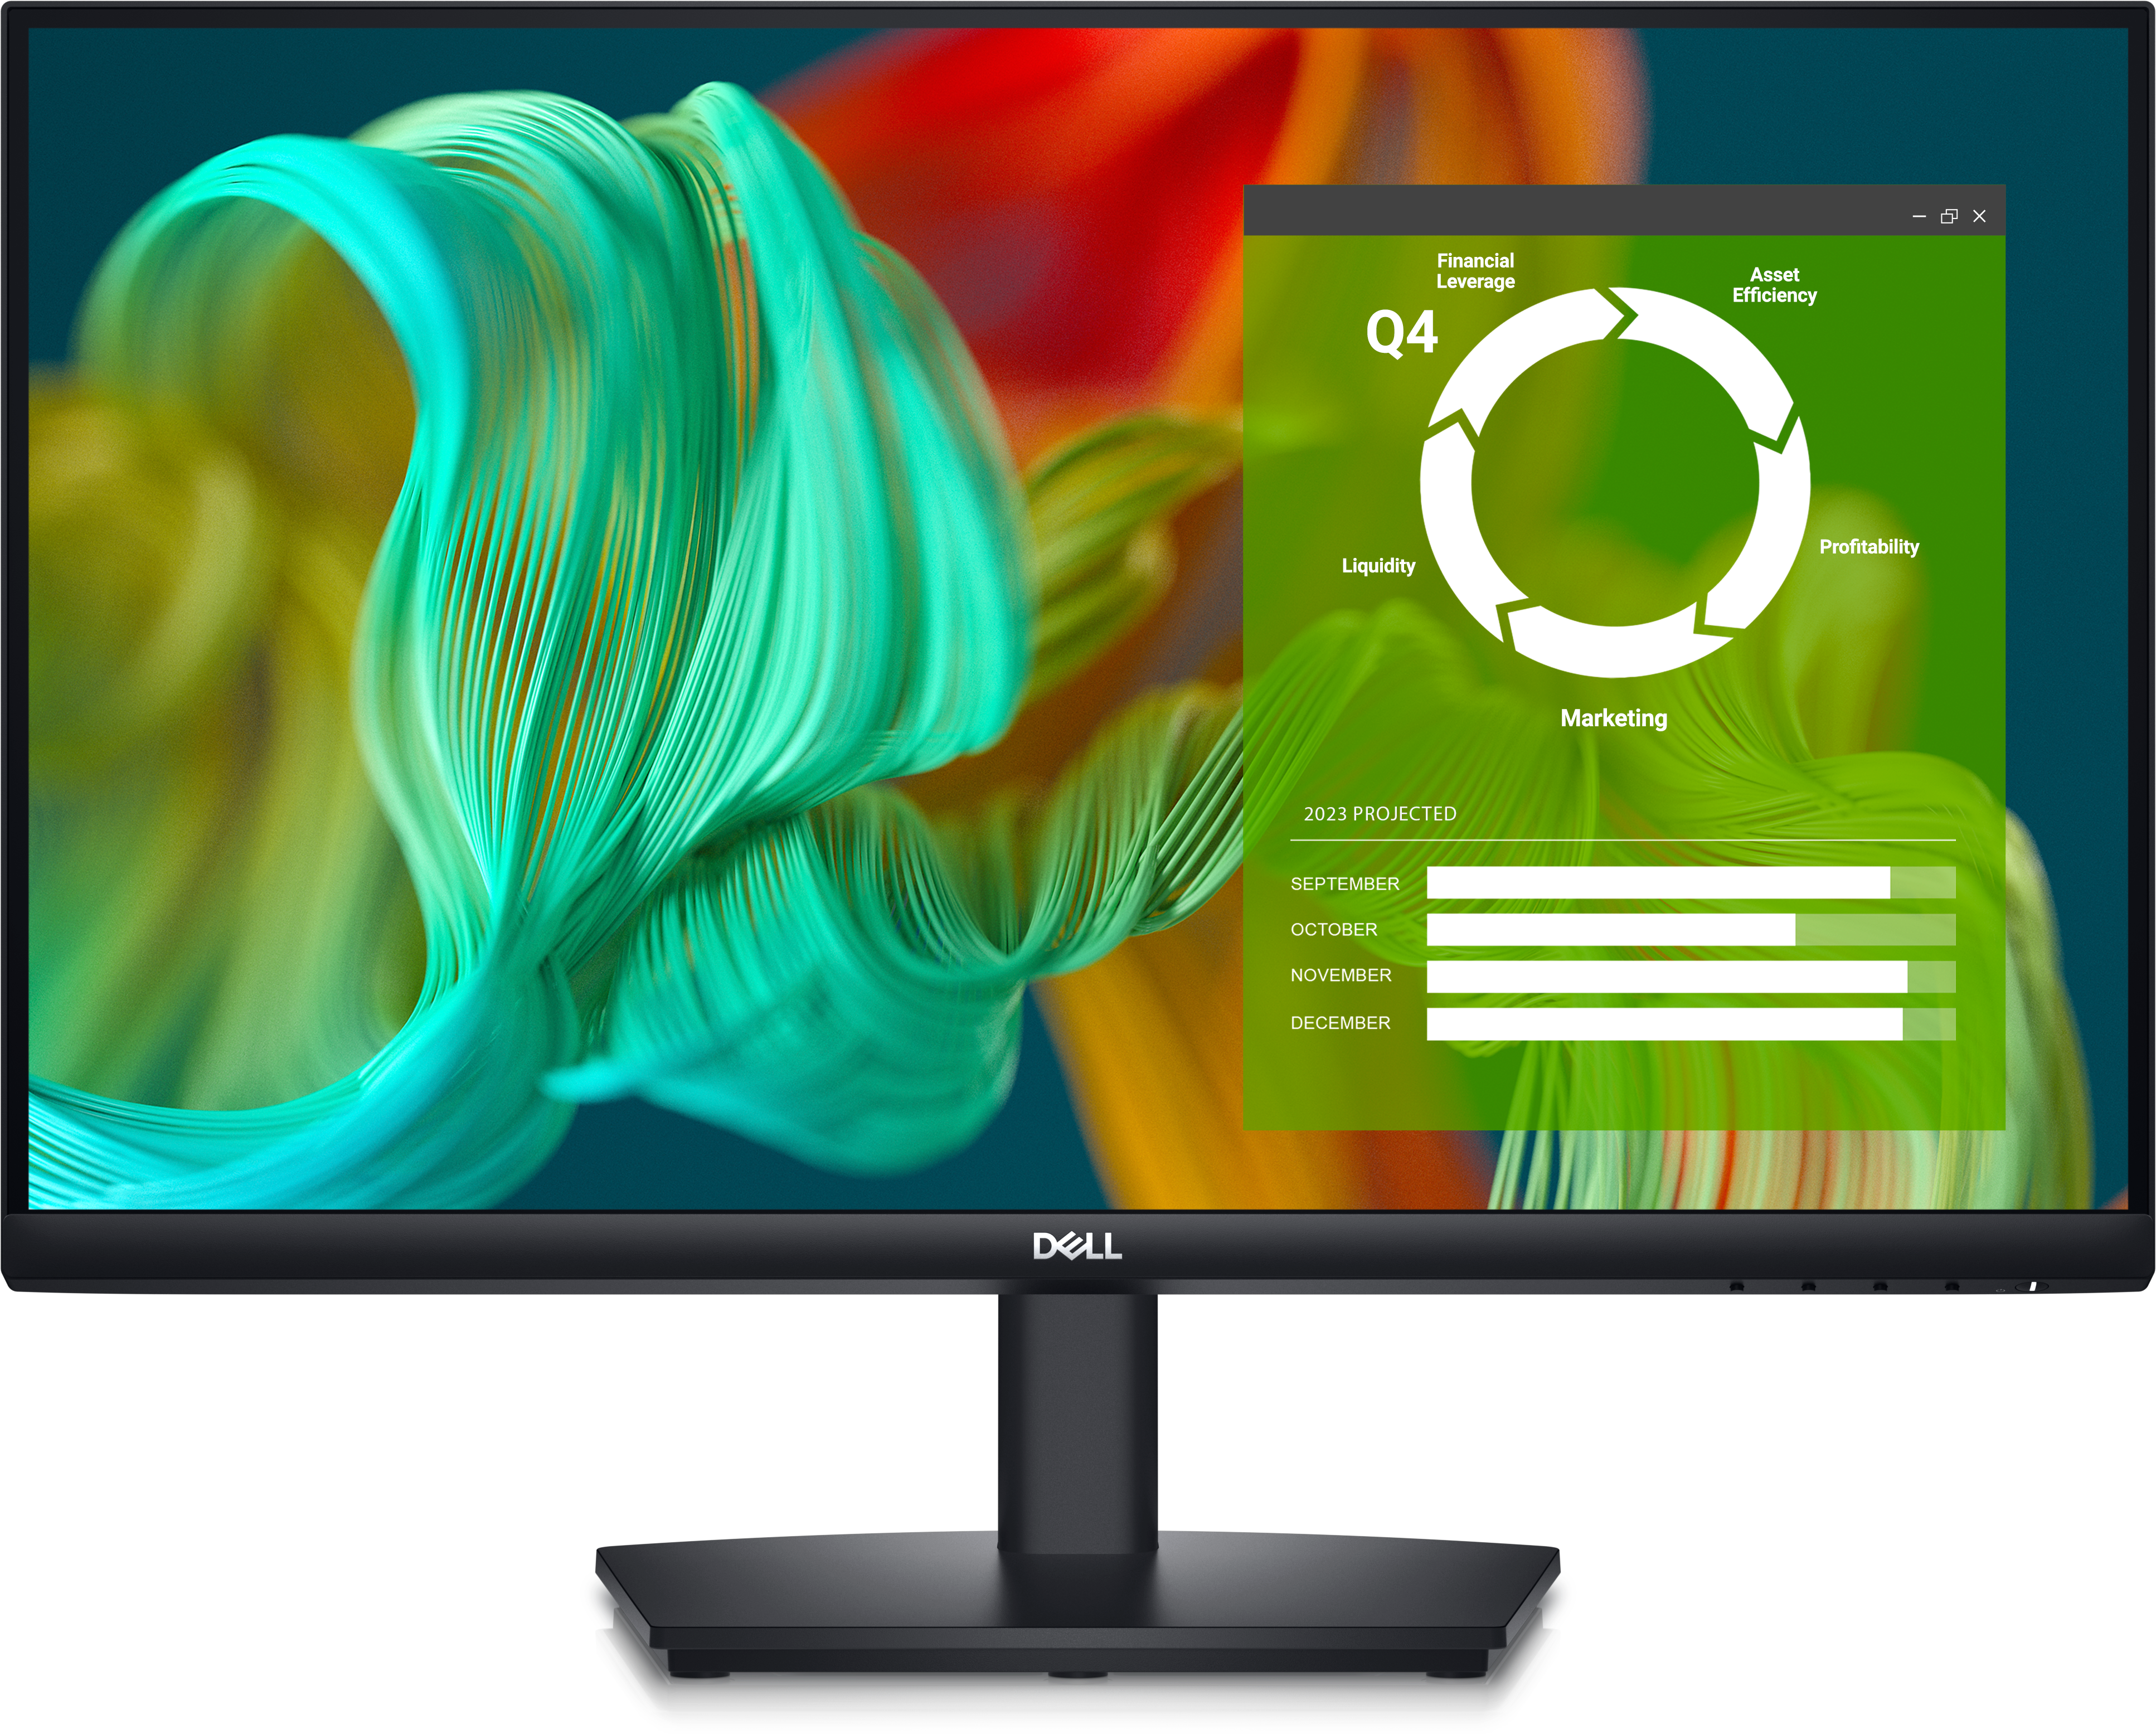 Dell 24 inch Monitor FHD (1920 x 1080) 16:9 Ratio with Comfortview